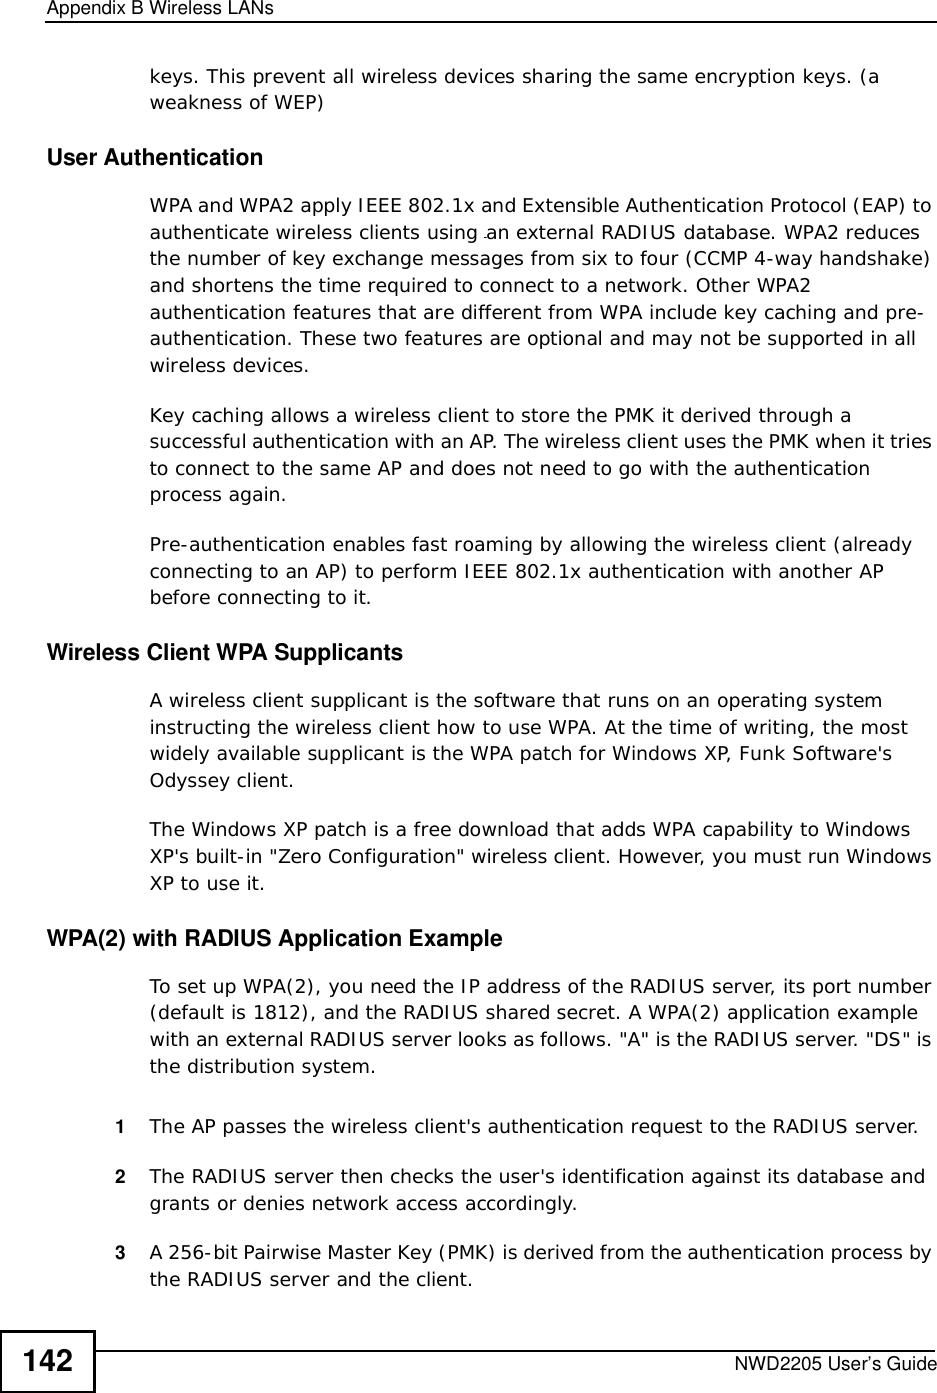 Appendix BWireless LANsNWD2205 User’s Guide142keys. This prevent all wireless devices sharing the same encryption keys. (a weakness of WEP)User Authentication WPA and WPA2 apply IEEE 802.1x and Extensible Authentication Protocol (EAP) to authenticate wireless clients using an external RADIUS database. WPA2 reduces the number of key exchange messages from six to four (CCMP 4-way handshake) and shortens the time required to connect to a network. Other WPA2 authentication features that are different from WPA include key caching and pre-authentication. These two features are optional and may not be supported in all wireless devices.Key caching allows a wireless client to store the PMK it derived through a successful authentication with an AP. The wireless client uses the PMK when it tries to connect to the same AP and does not need to go with the authentication process again.Pre-authentication enables fast roaming by allowing the wireless client (already connecting to an AP) to perform IEEE 802.1x authentication with another AP before connecting to it.Wireless Client WPA SupplicantsA wireless client supplicant is the software that runs on an operating system instructing the wireless client how to use WPA. At the time of writing, the most widely available supplicant is theWPA patch for Windows XP, Funk Software&apos;s Odyssey client. The Windows XP patch is a free download that adds WPA capability to Windows XP&apos;s built-in &quot;Zero Configuration&quot; wireless client. However, you must run Windows XP to use it. WPA(2) with RADIUS Application ExampleTo set up WPA(2), you need the IP address of the RADIUS server, its port number (default is 1812), and the RADIUS shared secret. A WPA(2) application example with an external RADIUS server looks as follows. &quot;A&quot; is the RADIUS server. &quot;DS&quot; is the distribution system.1The AP passes the wireless client&apos;s authentication request to the RADIUS server.2The RADIUS server then checks the user&apos;s identification against its database and grants or denies network access accordingly.3A 256-bit Pairwise Master Key (PMK) is derived from the authentication process by the RADIUS server and the client.